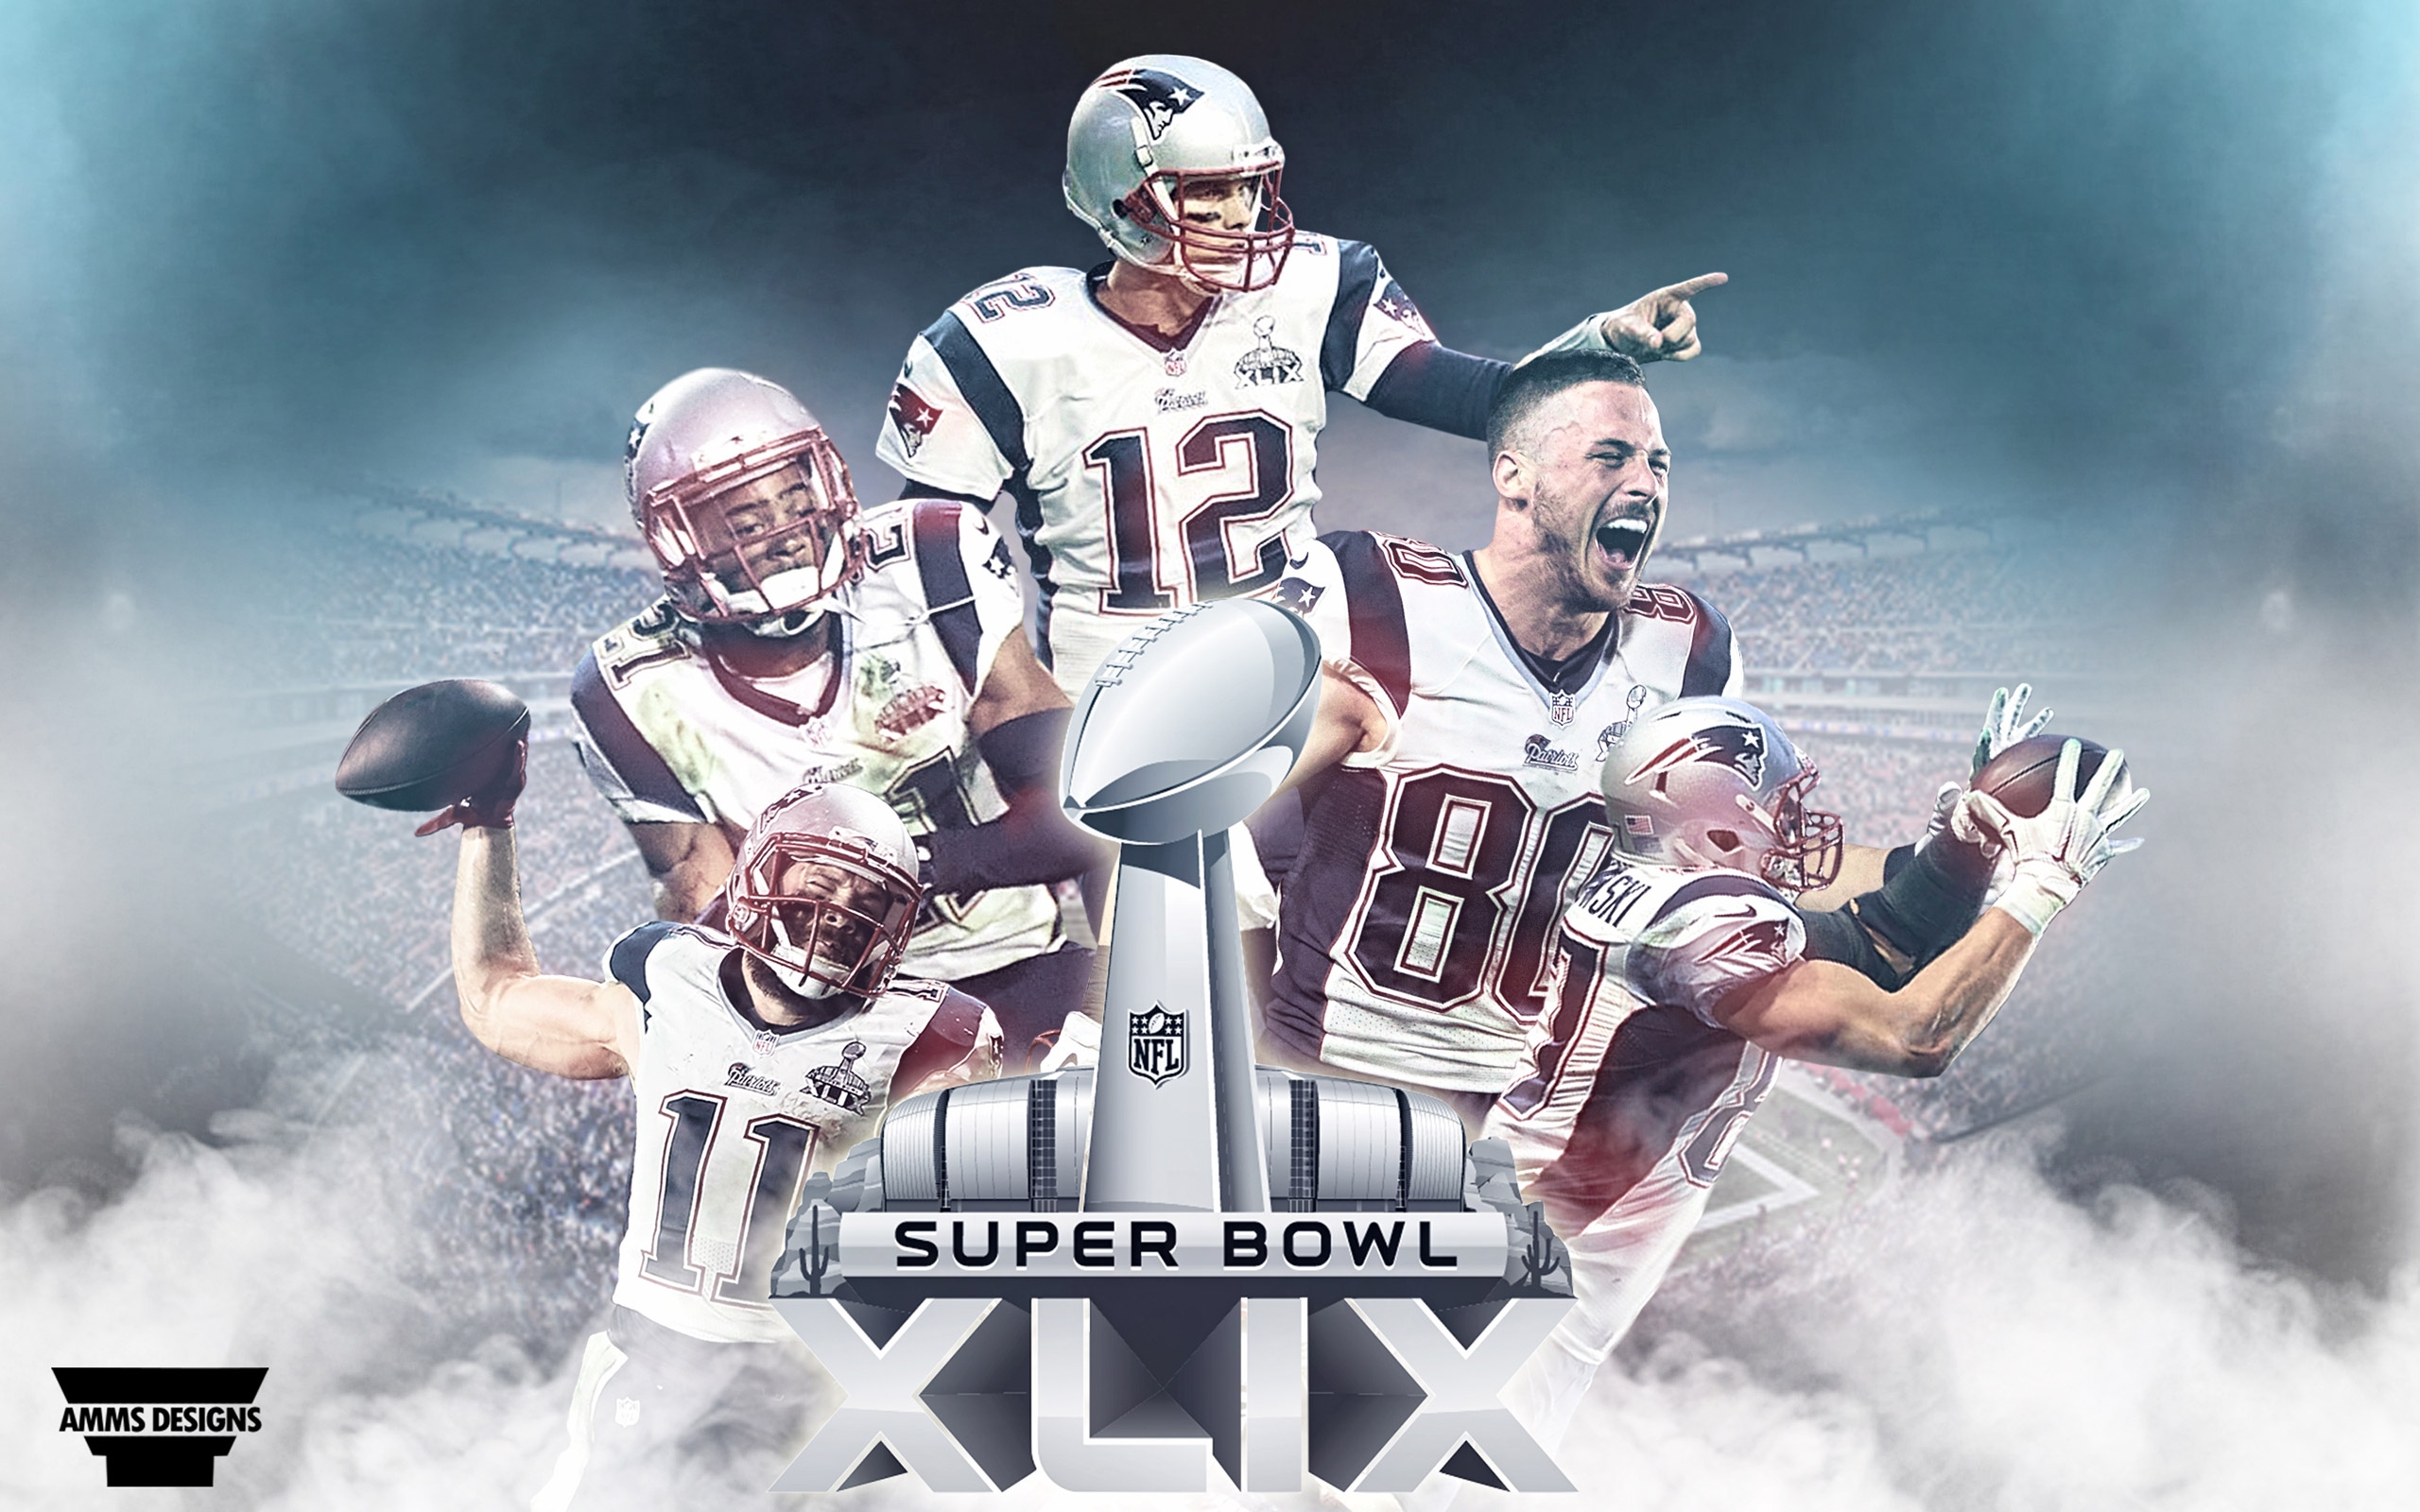 super bowl wallpaper,team,super bowl,sports gear,canadian football,competition event